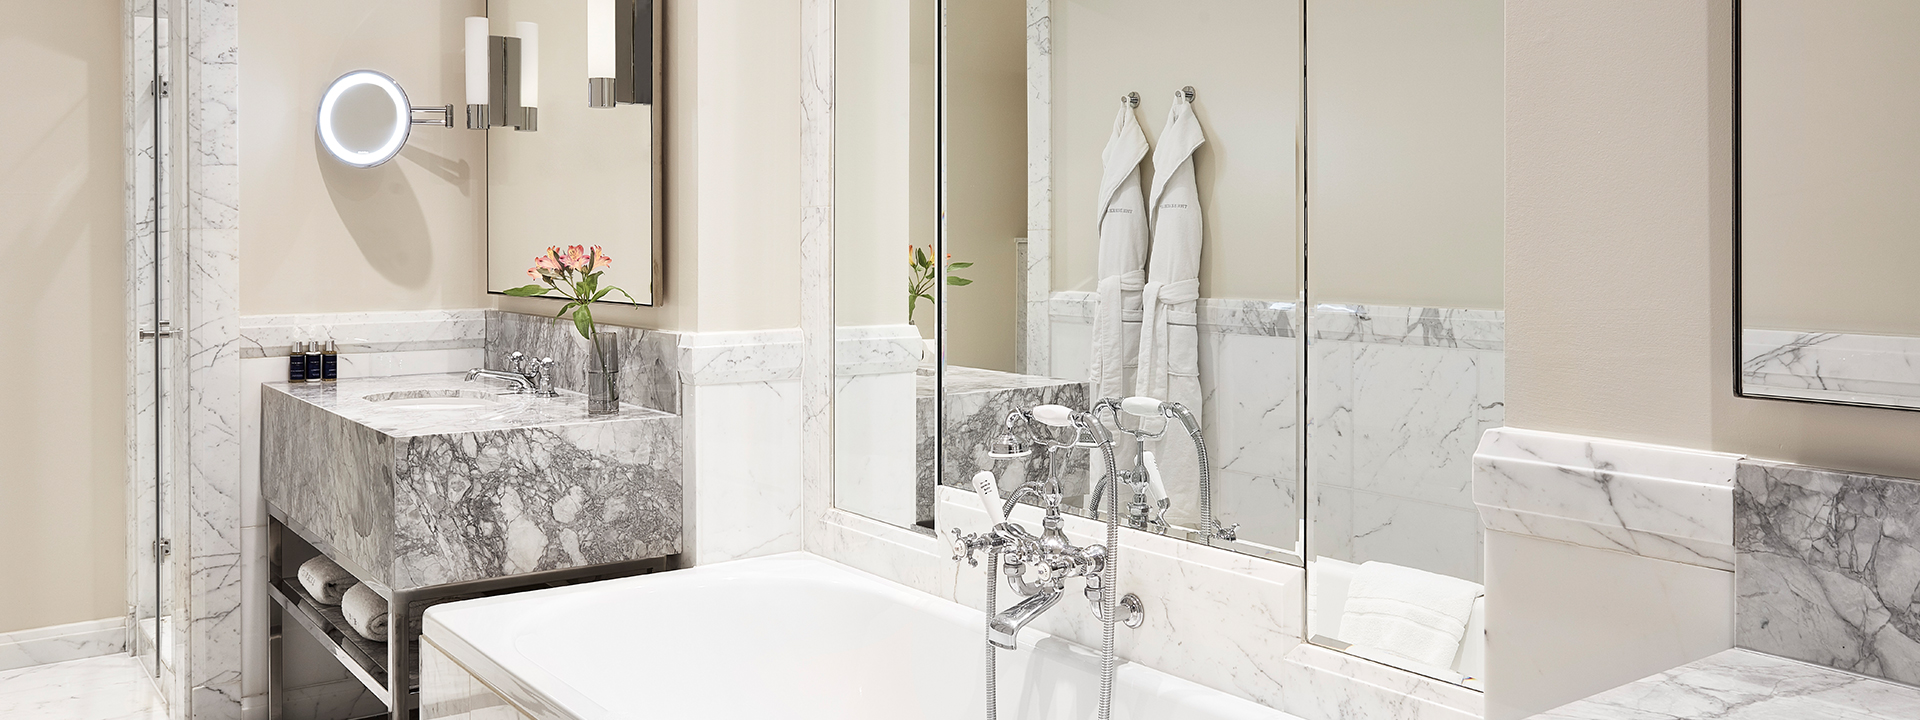 Large ensuite marble bathroom in the Belgravia Room, decorated with floral arrangements.